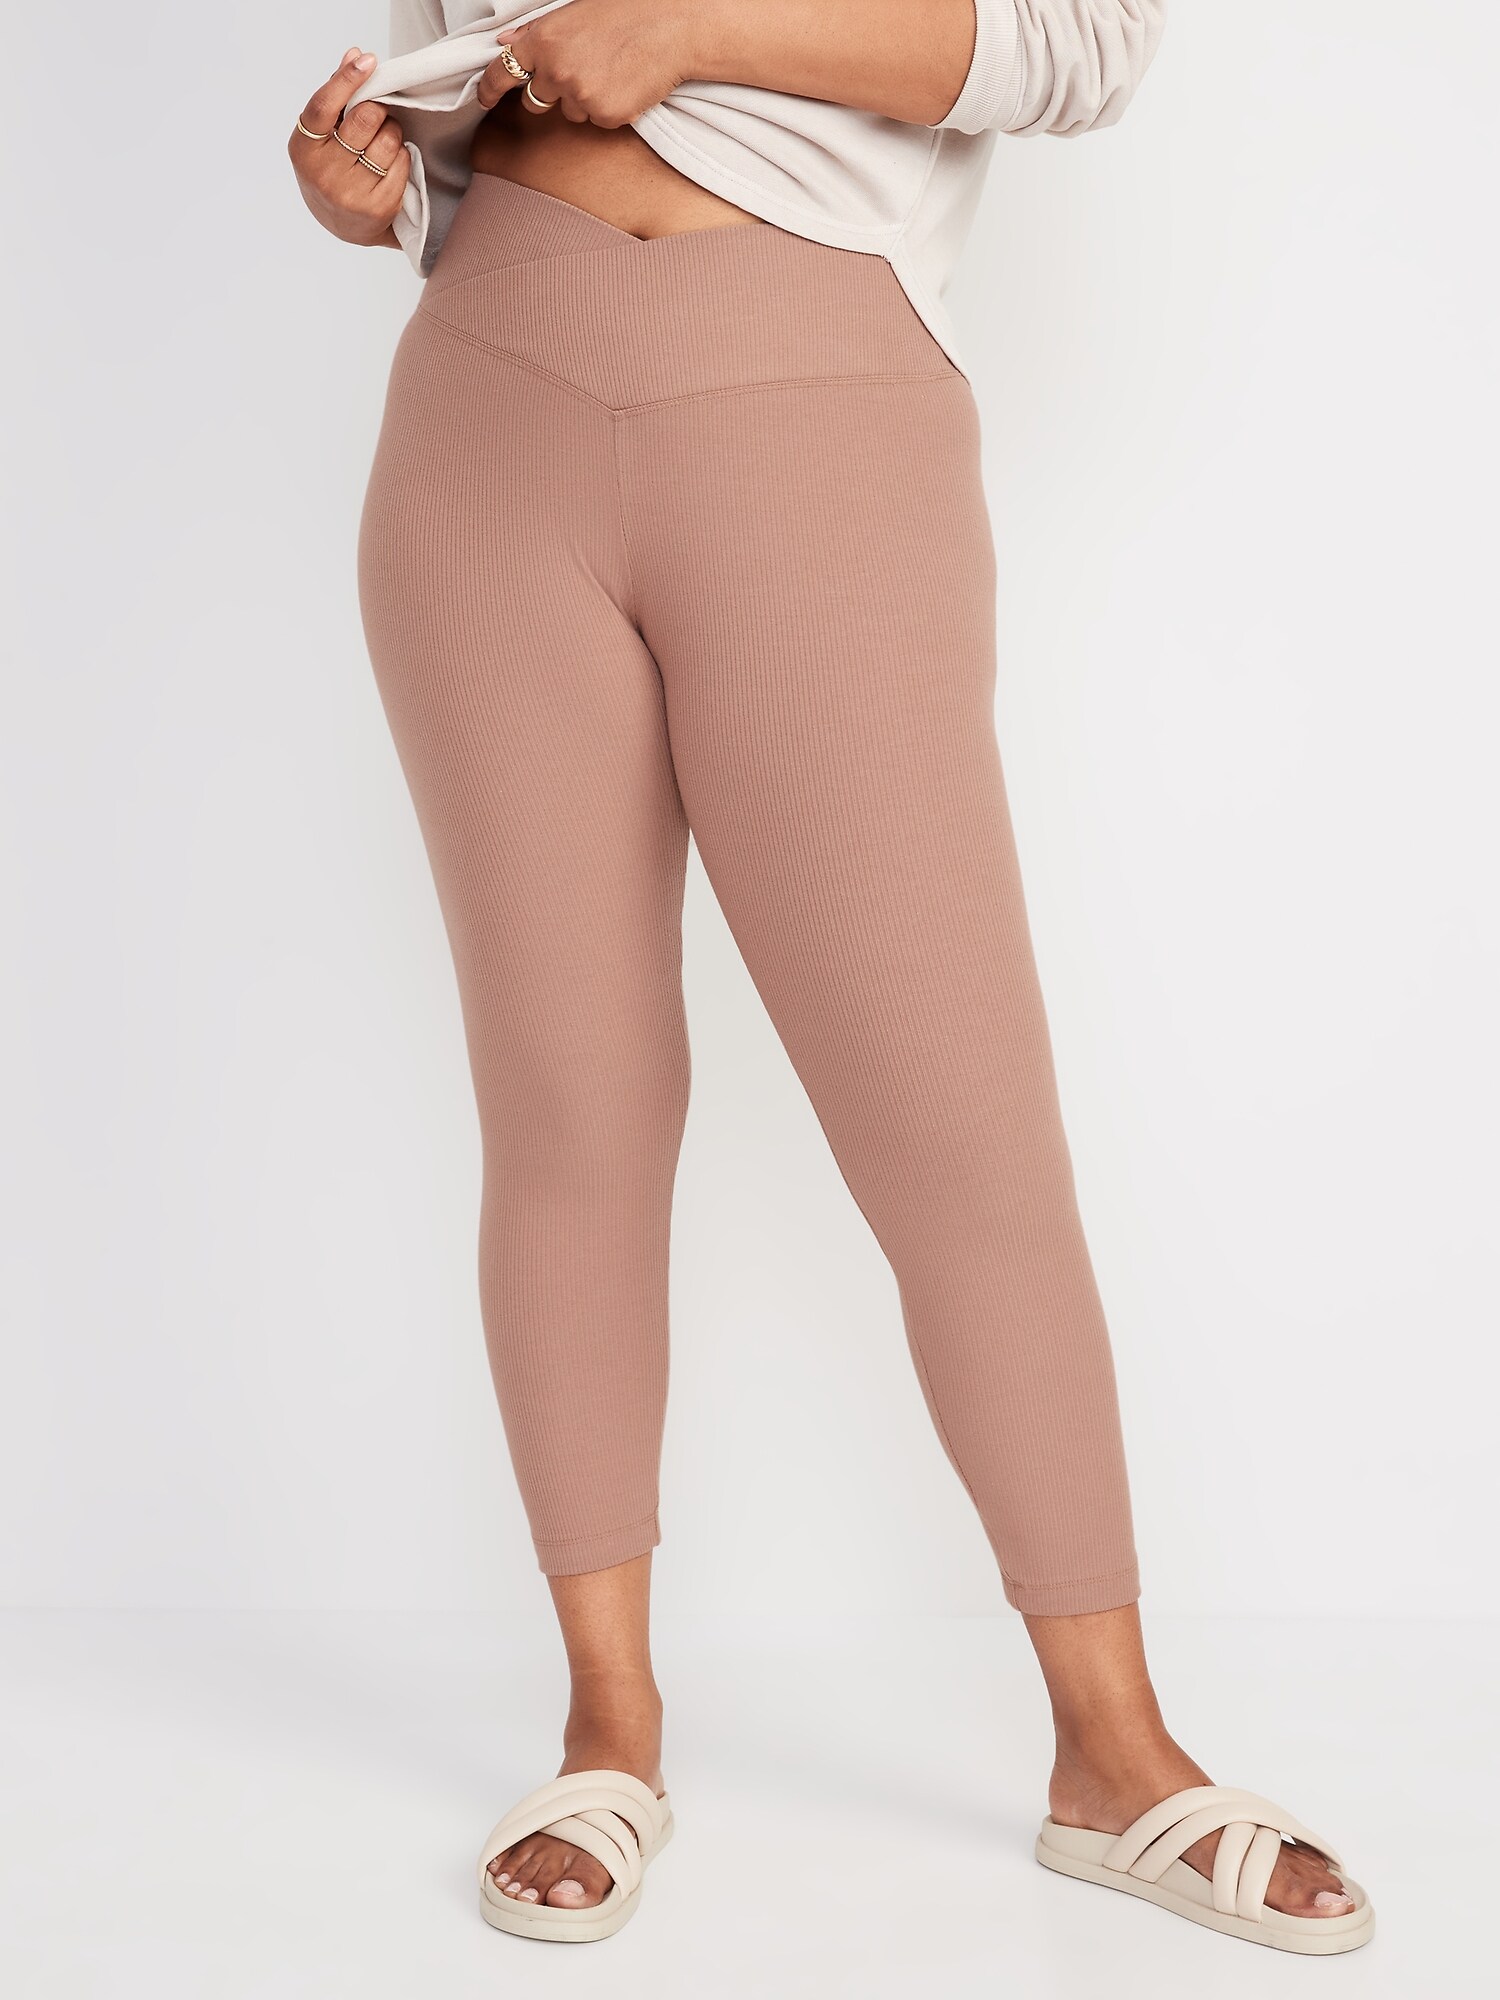 Extra High-Waisted Crossover Rib-Knit 7/8-Length Leggings for